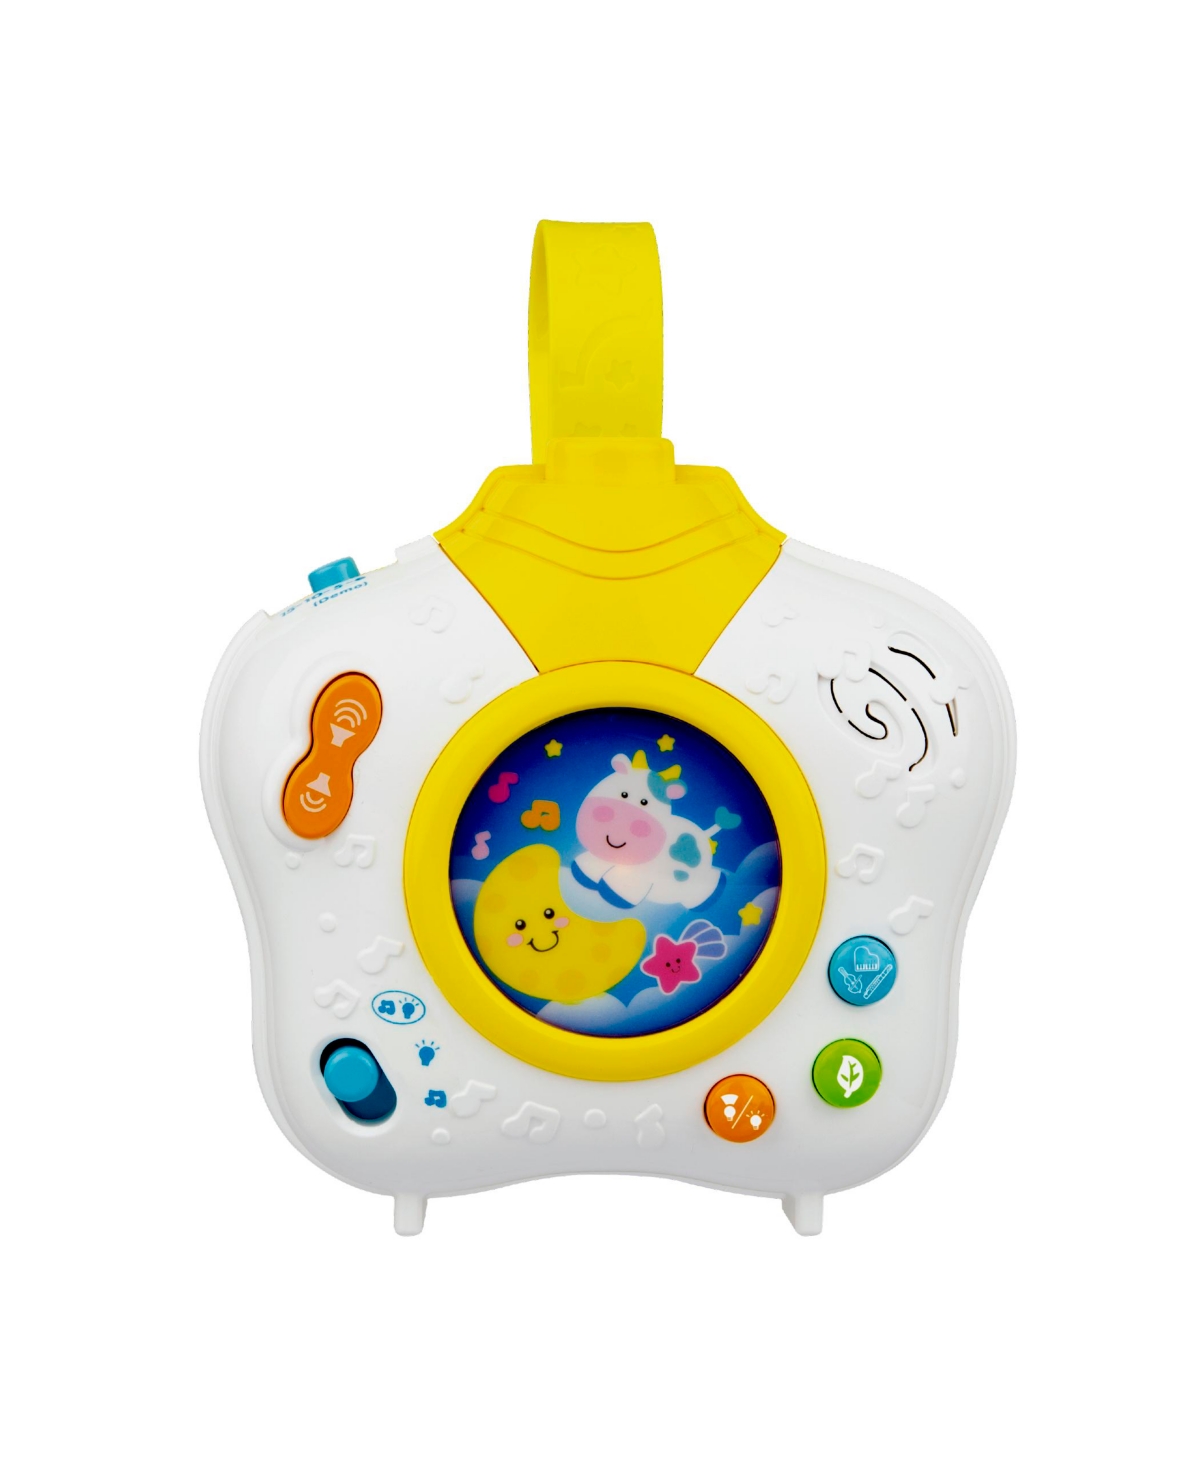 Winfun Baby's Dreamland Soothing Projector In Yellow